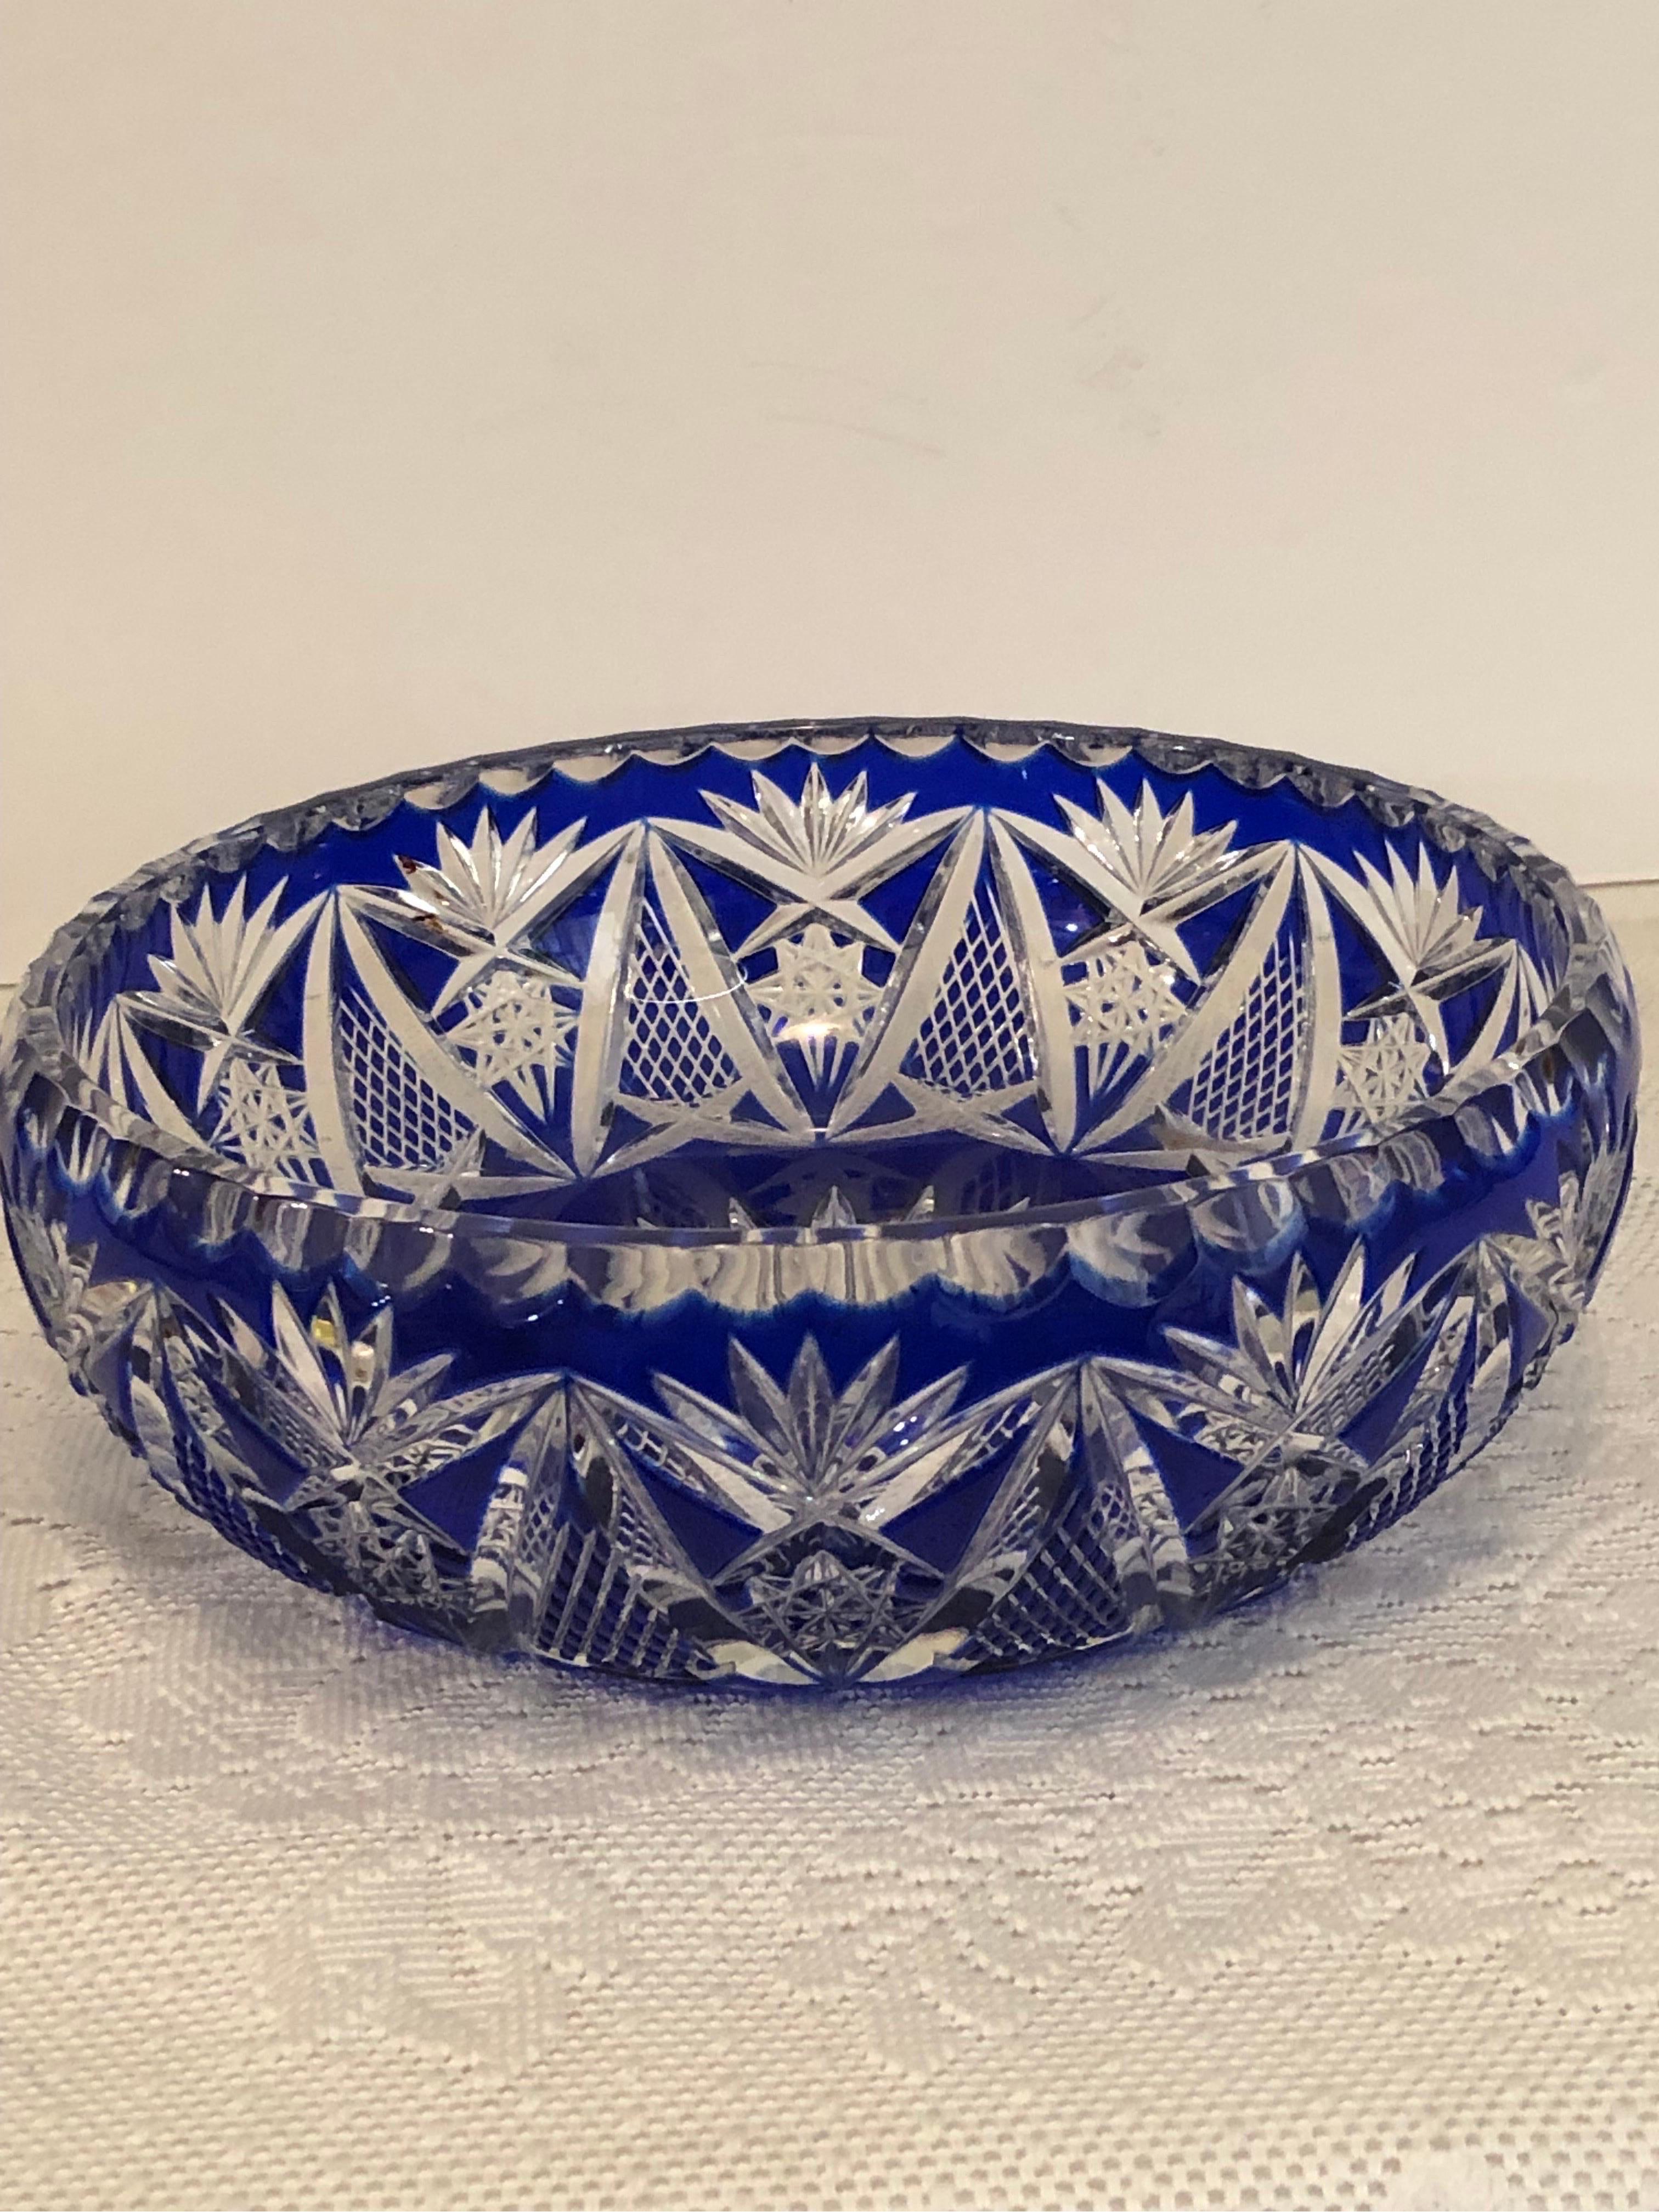 I am offering you this elaborately cut cobalt crystal Bohemian Czechoslovakian bowl. If you like brilliant cut glass, you will love this intricately cut bowl. It is a stunning bowl for you to use on your table. This bowl would also be beautiful in a